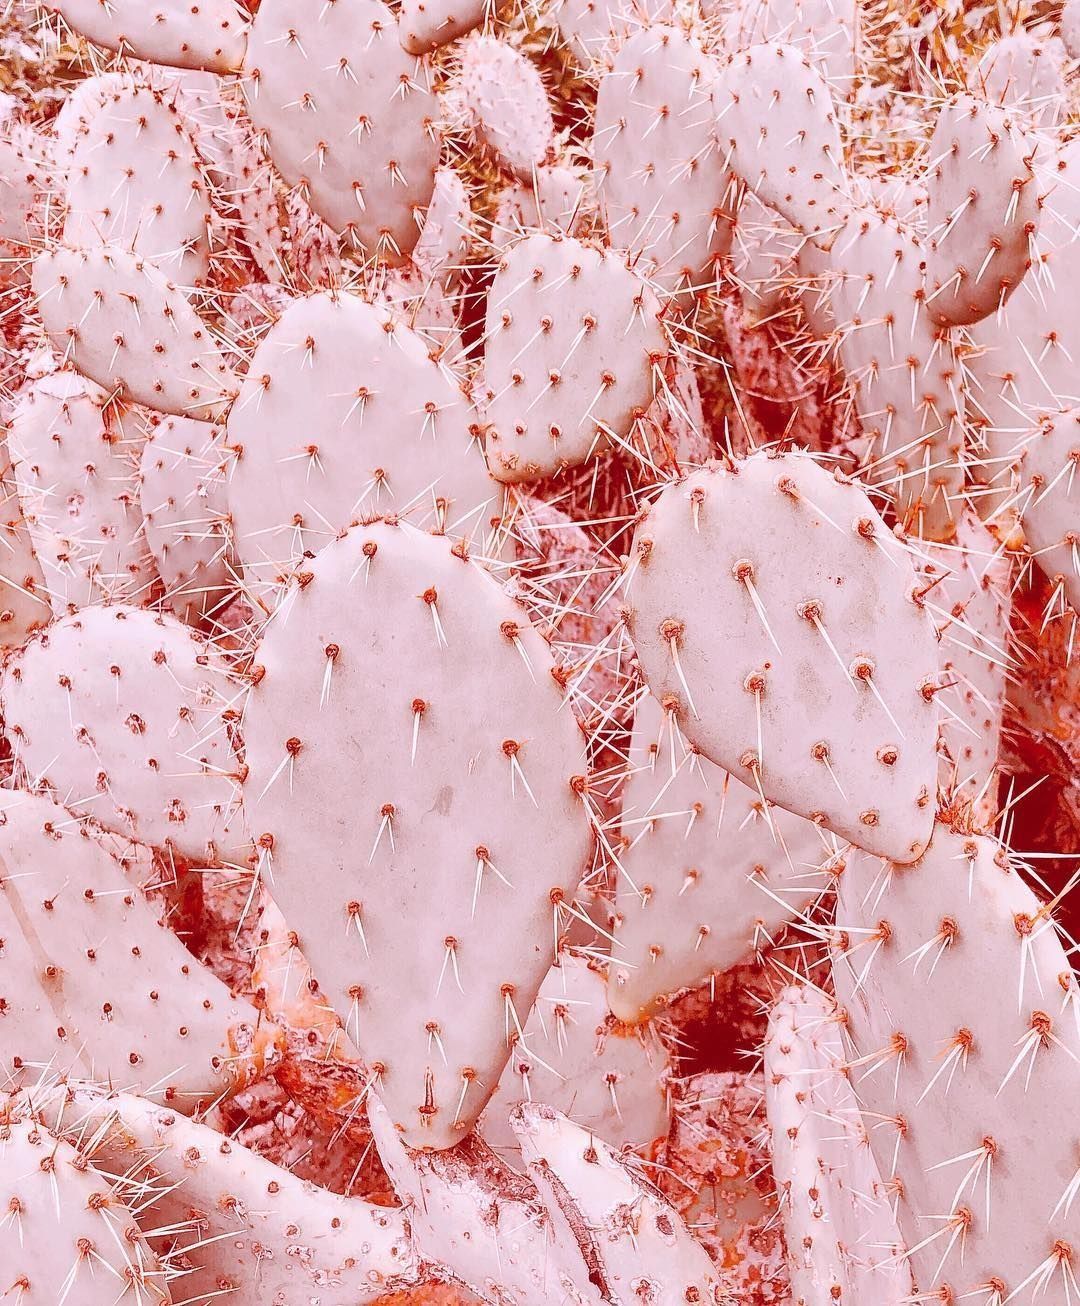 A photo of a cactus with a pink hue. - Cactus, pink